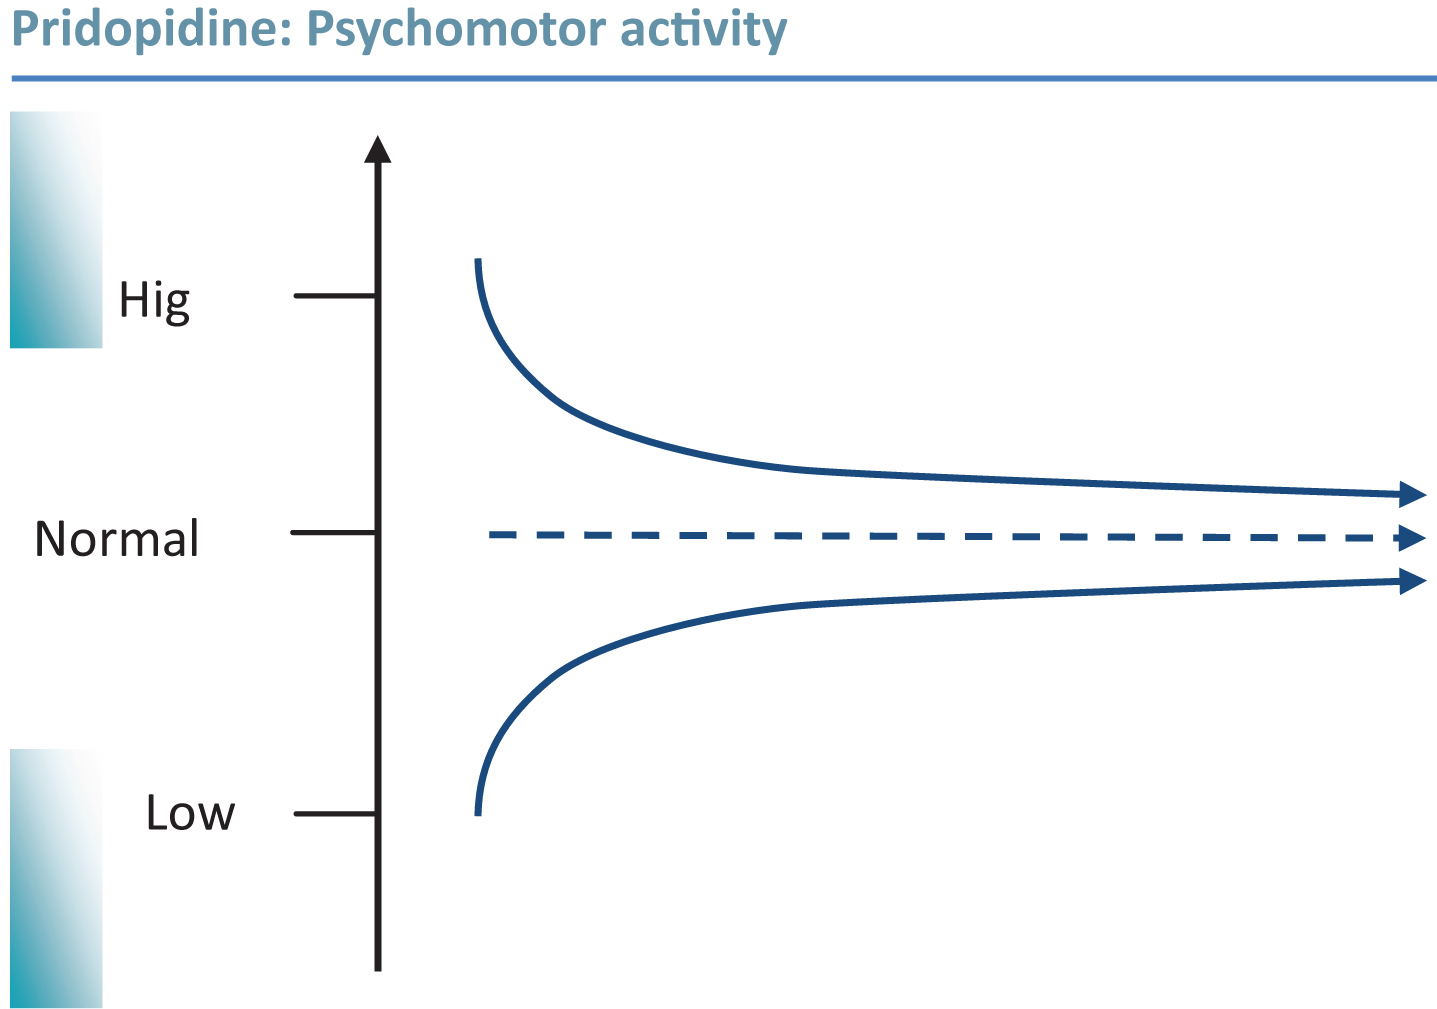 Pridopidine is able to enhance or inhibit dopamine-dependent functions. Graphic illustration of psycho-motor stabilization: In vivo pharmacological studies have consistently demonstrated state dependent behavioral effects of pridopidine; reducing psychomotor activity in hyperactive states, and enhancing activity in hypoactive states. This is proposed to translate to stabilization of both hyper- and hypokinetic motor disturbances in HD; to some extent overlapping with observations of disturbed dopamine transmission over the course of the disease [40].